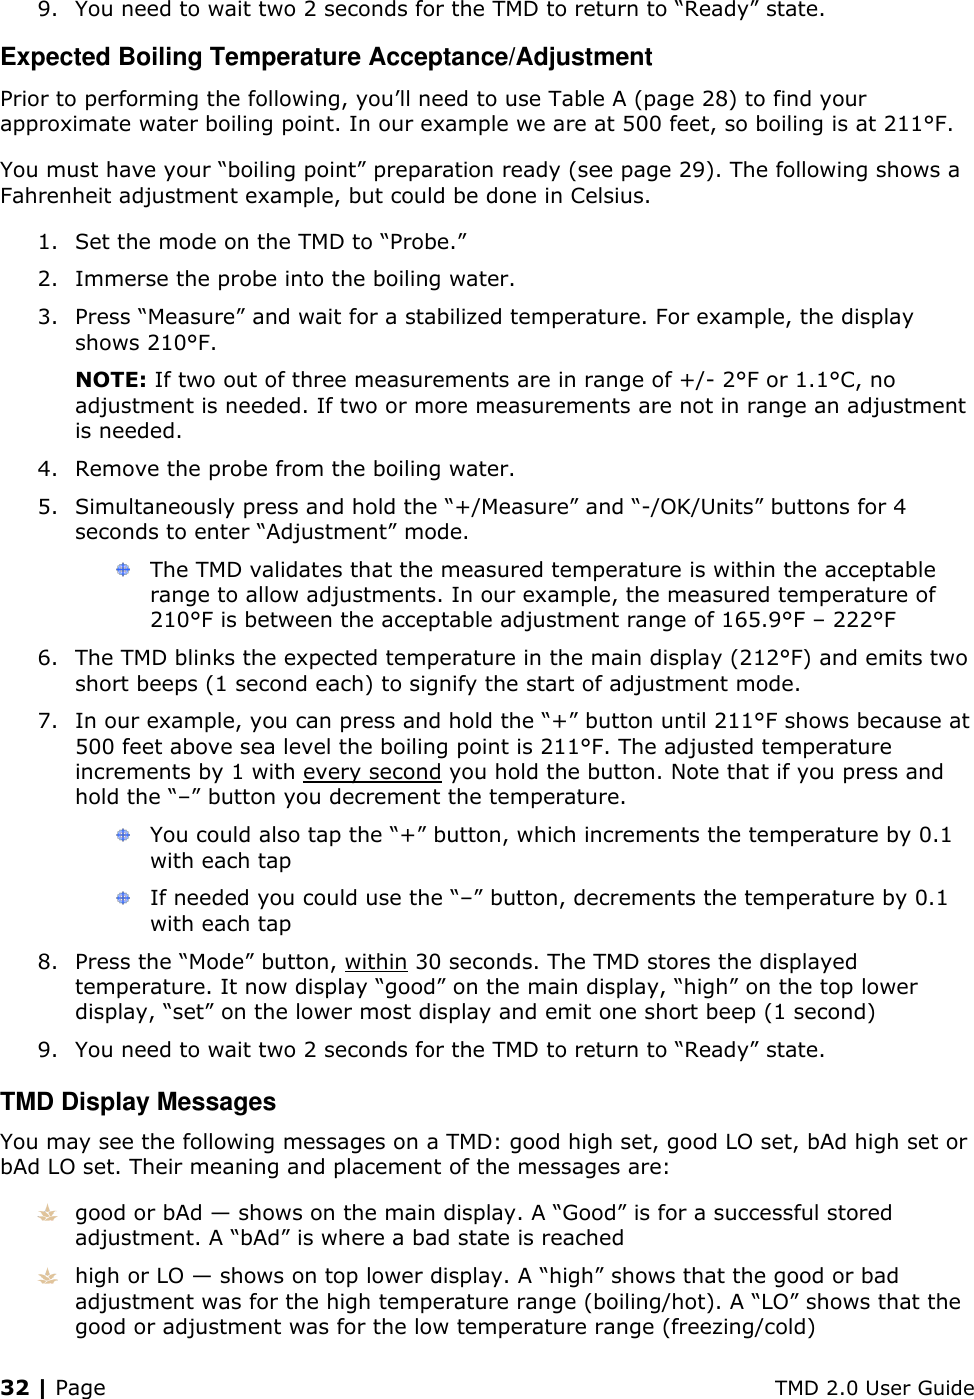 32 | Page    TMD 2.0 User Guide 9. You need to wait two 2 seconds for the TMD to return to “Ready” state. Expected Boiling Temperature Acceptance/Adjustment Prior to performing the following, you’ll need to use Table A (page 28) to find your approximate water boiling point. In our example we are at 500 feet, so boiling is at 211°F. You must have your “boiling point” preparation ready (see page 29). The following shows a Fahrenheit adjustment example, but could be done in Celsius. 1. Set the mode on the TMD to “Probe.” 2. Immerse the probe into the boiling water. 3. Press “Measure” and wait for a stabilized temperature. For example, the display shows 210°F. NOTE: If two out of three measurements are in range of +/- 2°F or 1.1°C, no adjustment is needed. If two or more measurements are not in range an adjustment is needed. 4. Remove the probe from the boiling water. 5. Simultaneously press and hold the “+/Measure” and “-/OK/Units” buttons for 4 seconds to enter “Adjustment” mode.  The TMD validates that the measured temperature is within the acceptable range to allow adjustments. In our example, the measured temperature of 210°F is between the acceptable adjustment range of 165.9°F – 222°F 6. The TMD blinks the expected temperature in the main display (212°F) and emits two short beeps (1 second each) to signify the start of adjustment mode. 7. In our example, you can press and hold the “+” button until 211°F shows because at 500 feet above sea level the boiling point is 211°F. The adjusted temperature increments by 1 with every second you hold the button. Note that if you press and hold the “–” button you decrement the temperature.  You could also tap the “+” button, which increments the temperature by 0.1 with each tap  If needed you could use the “–” button, decrements the temperature by 0.1 with each tap 8. Press the “Mode” button, within 30 seconds. The TMD stores the displayed temperature. It now display “good” on the main display, “high” on the top lower display, “set” on the lower most display and emit one short beep (1 second) 9. You need to wait two 2 seconds for the TMD to return to “Ready” state. TMD Display Messages You may see the following messages on a TMD: good high set, good LO set, bAd high set or bAd LO set. Their meaning and placement of the messages are:  good or bAd — shows on the main display. A “Good” is for a successful stored adjustment. A “bAd” is where a bad state is reached  high or LO — shows on top lower display. A “high” shows that the good or bad adjustment was for the high temperature range (boiling/hot). A “LO” shows that the good or adjustment was for the low temperature range (freezing/cold)